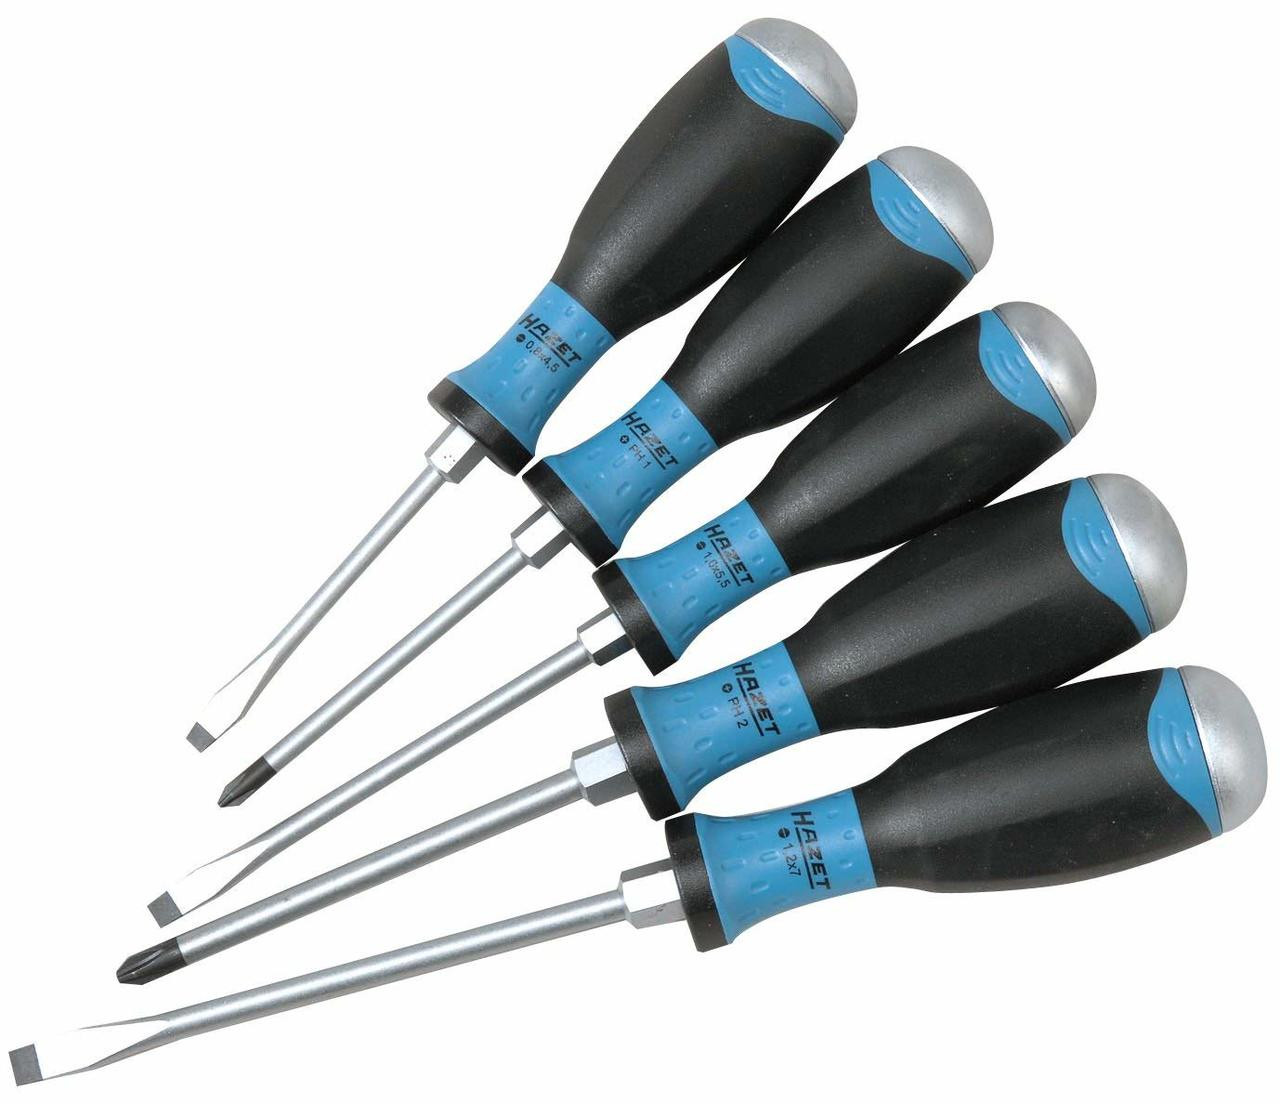 with 4 assorted screwdrivers and 1 hammer. 5-in-1 Hammer toolset